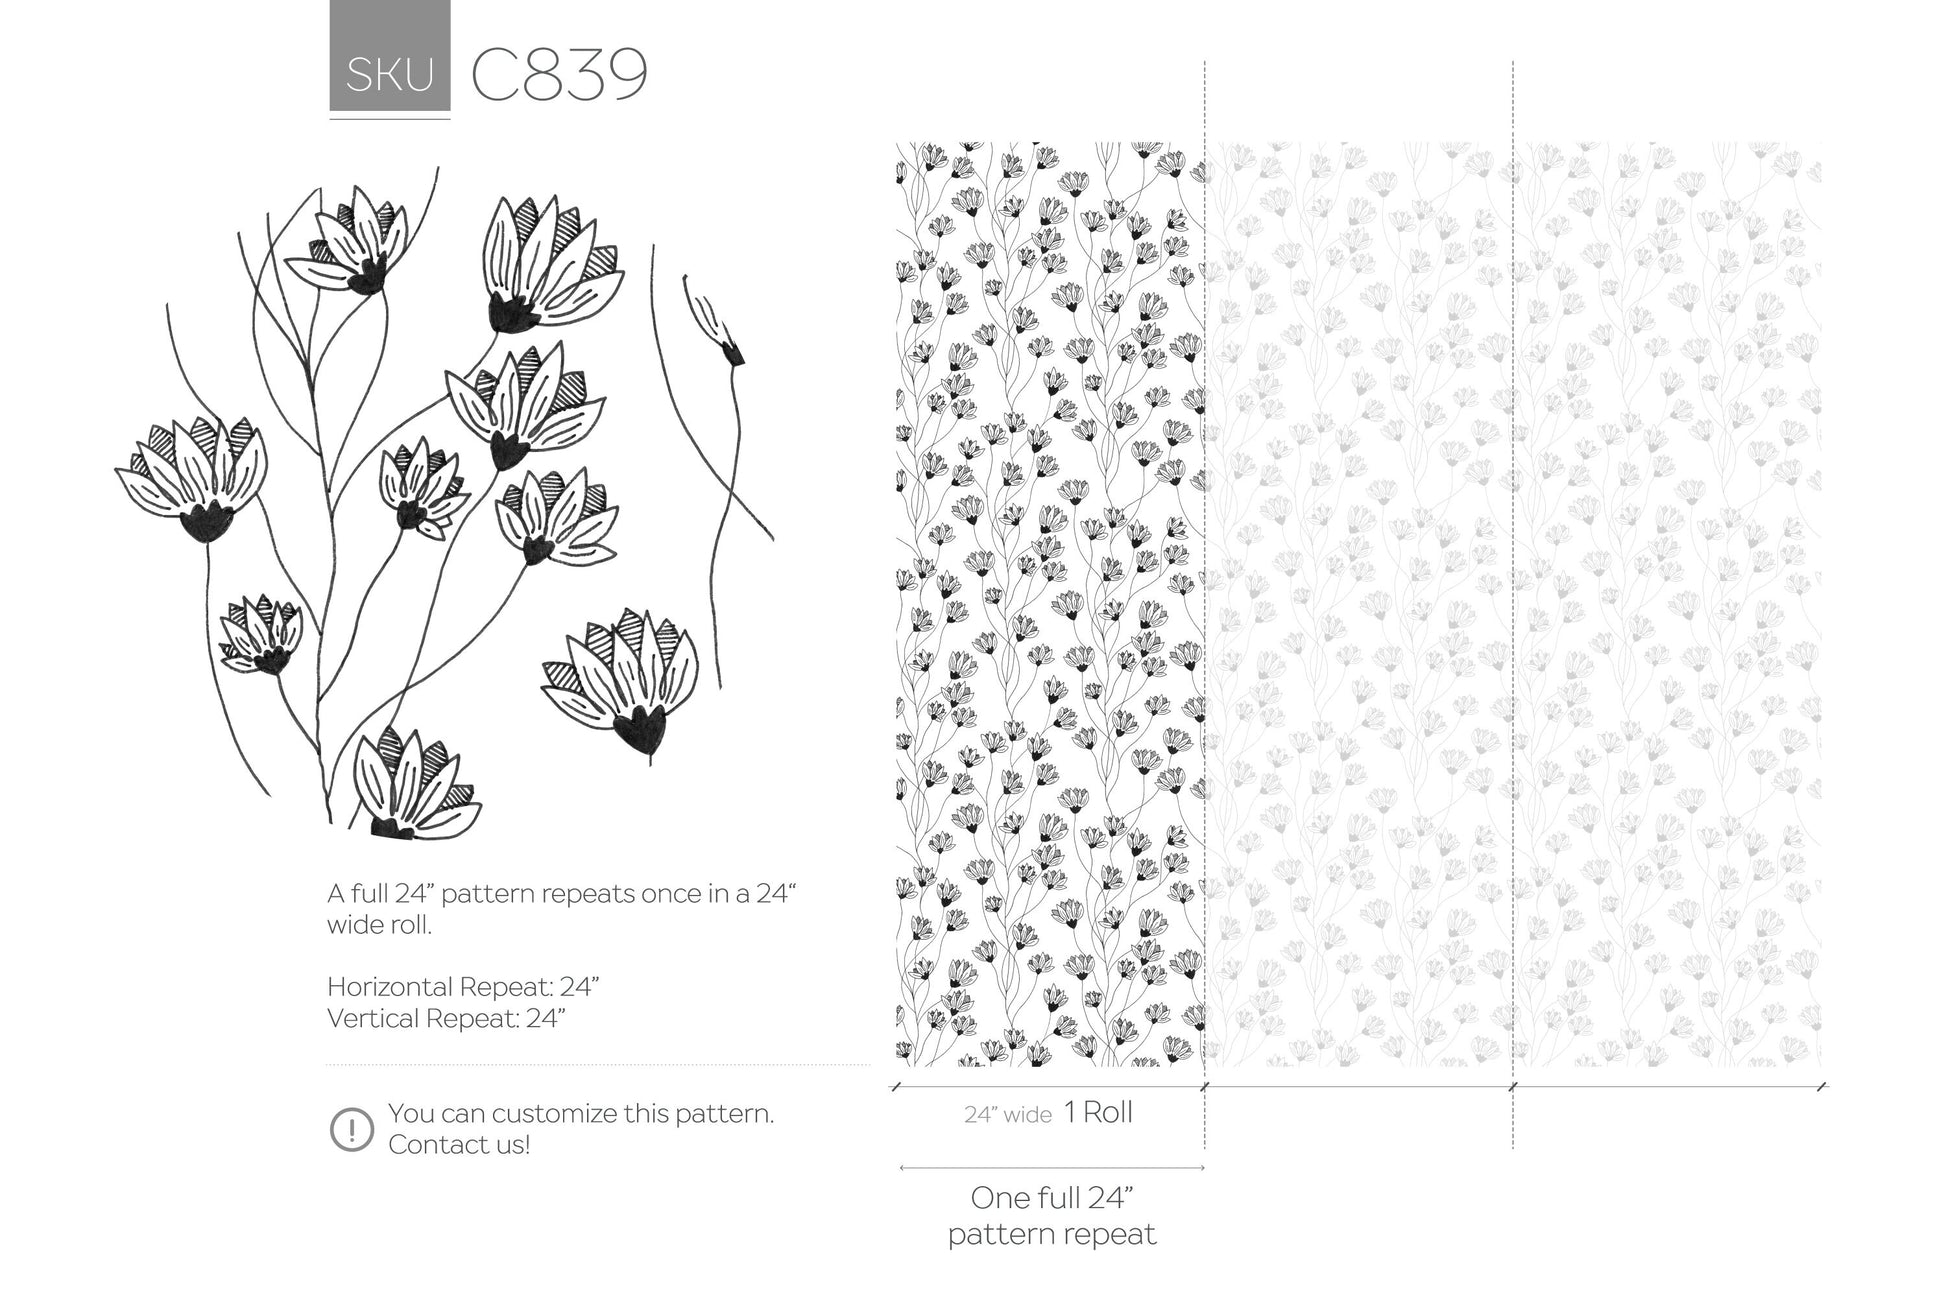 Black and White Wild Flowers Wallpaper / Peel and Stick Wallpaper Removable Wallpaper Home Decor Wall Art Wall Decor Room Decor - C839